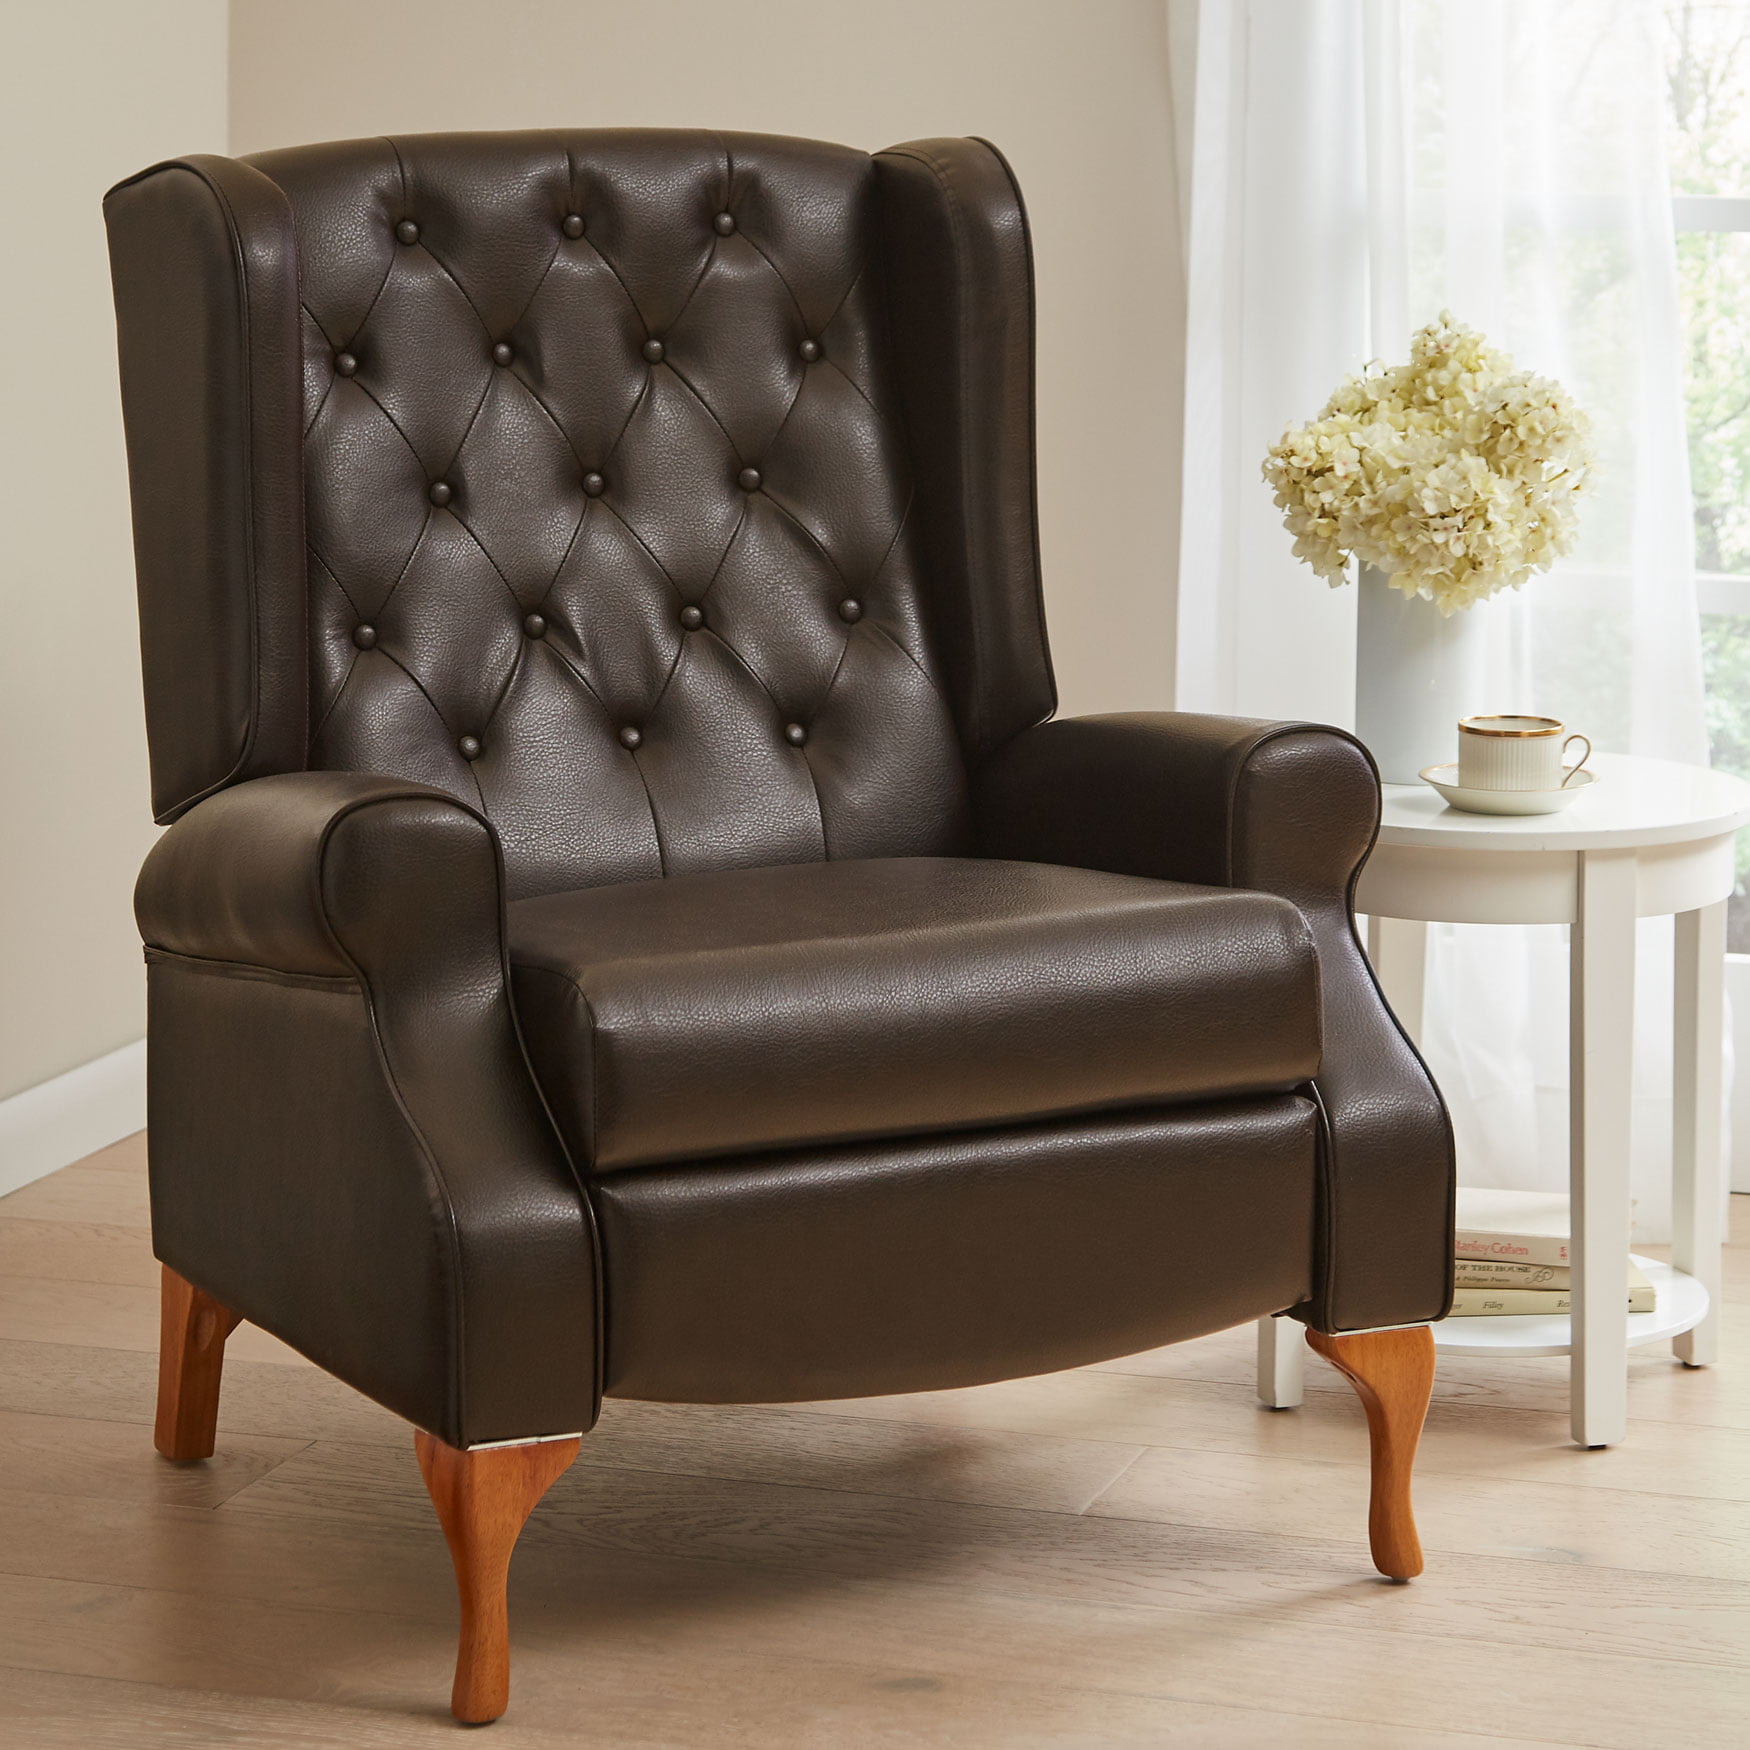 Brylanehome Oversized Queen Anne Style, Brown Leather Wingback Recliner Chair